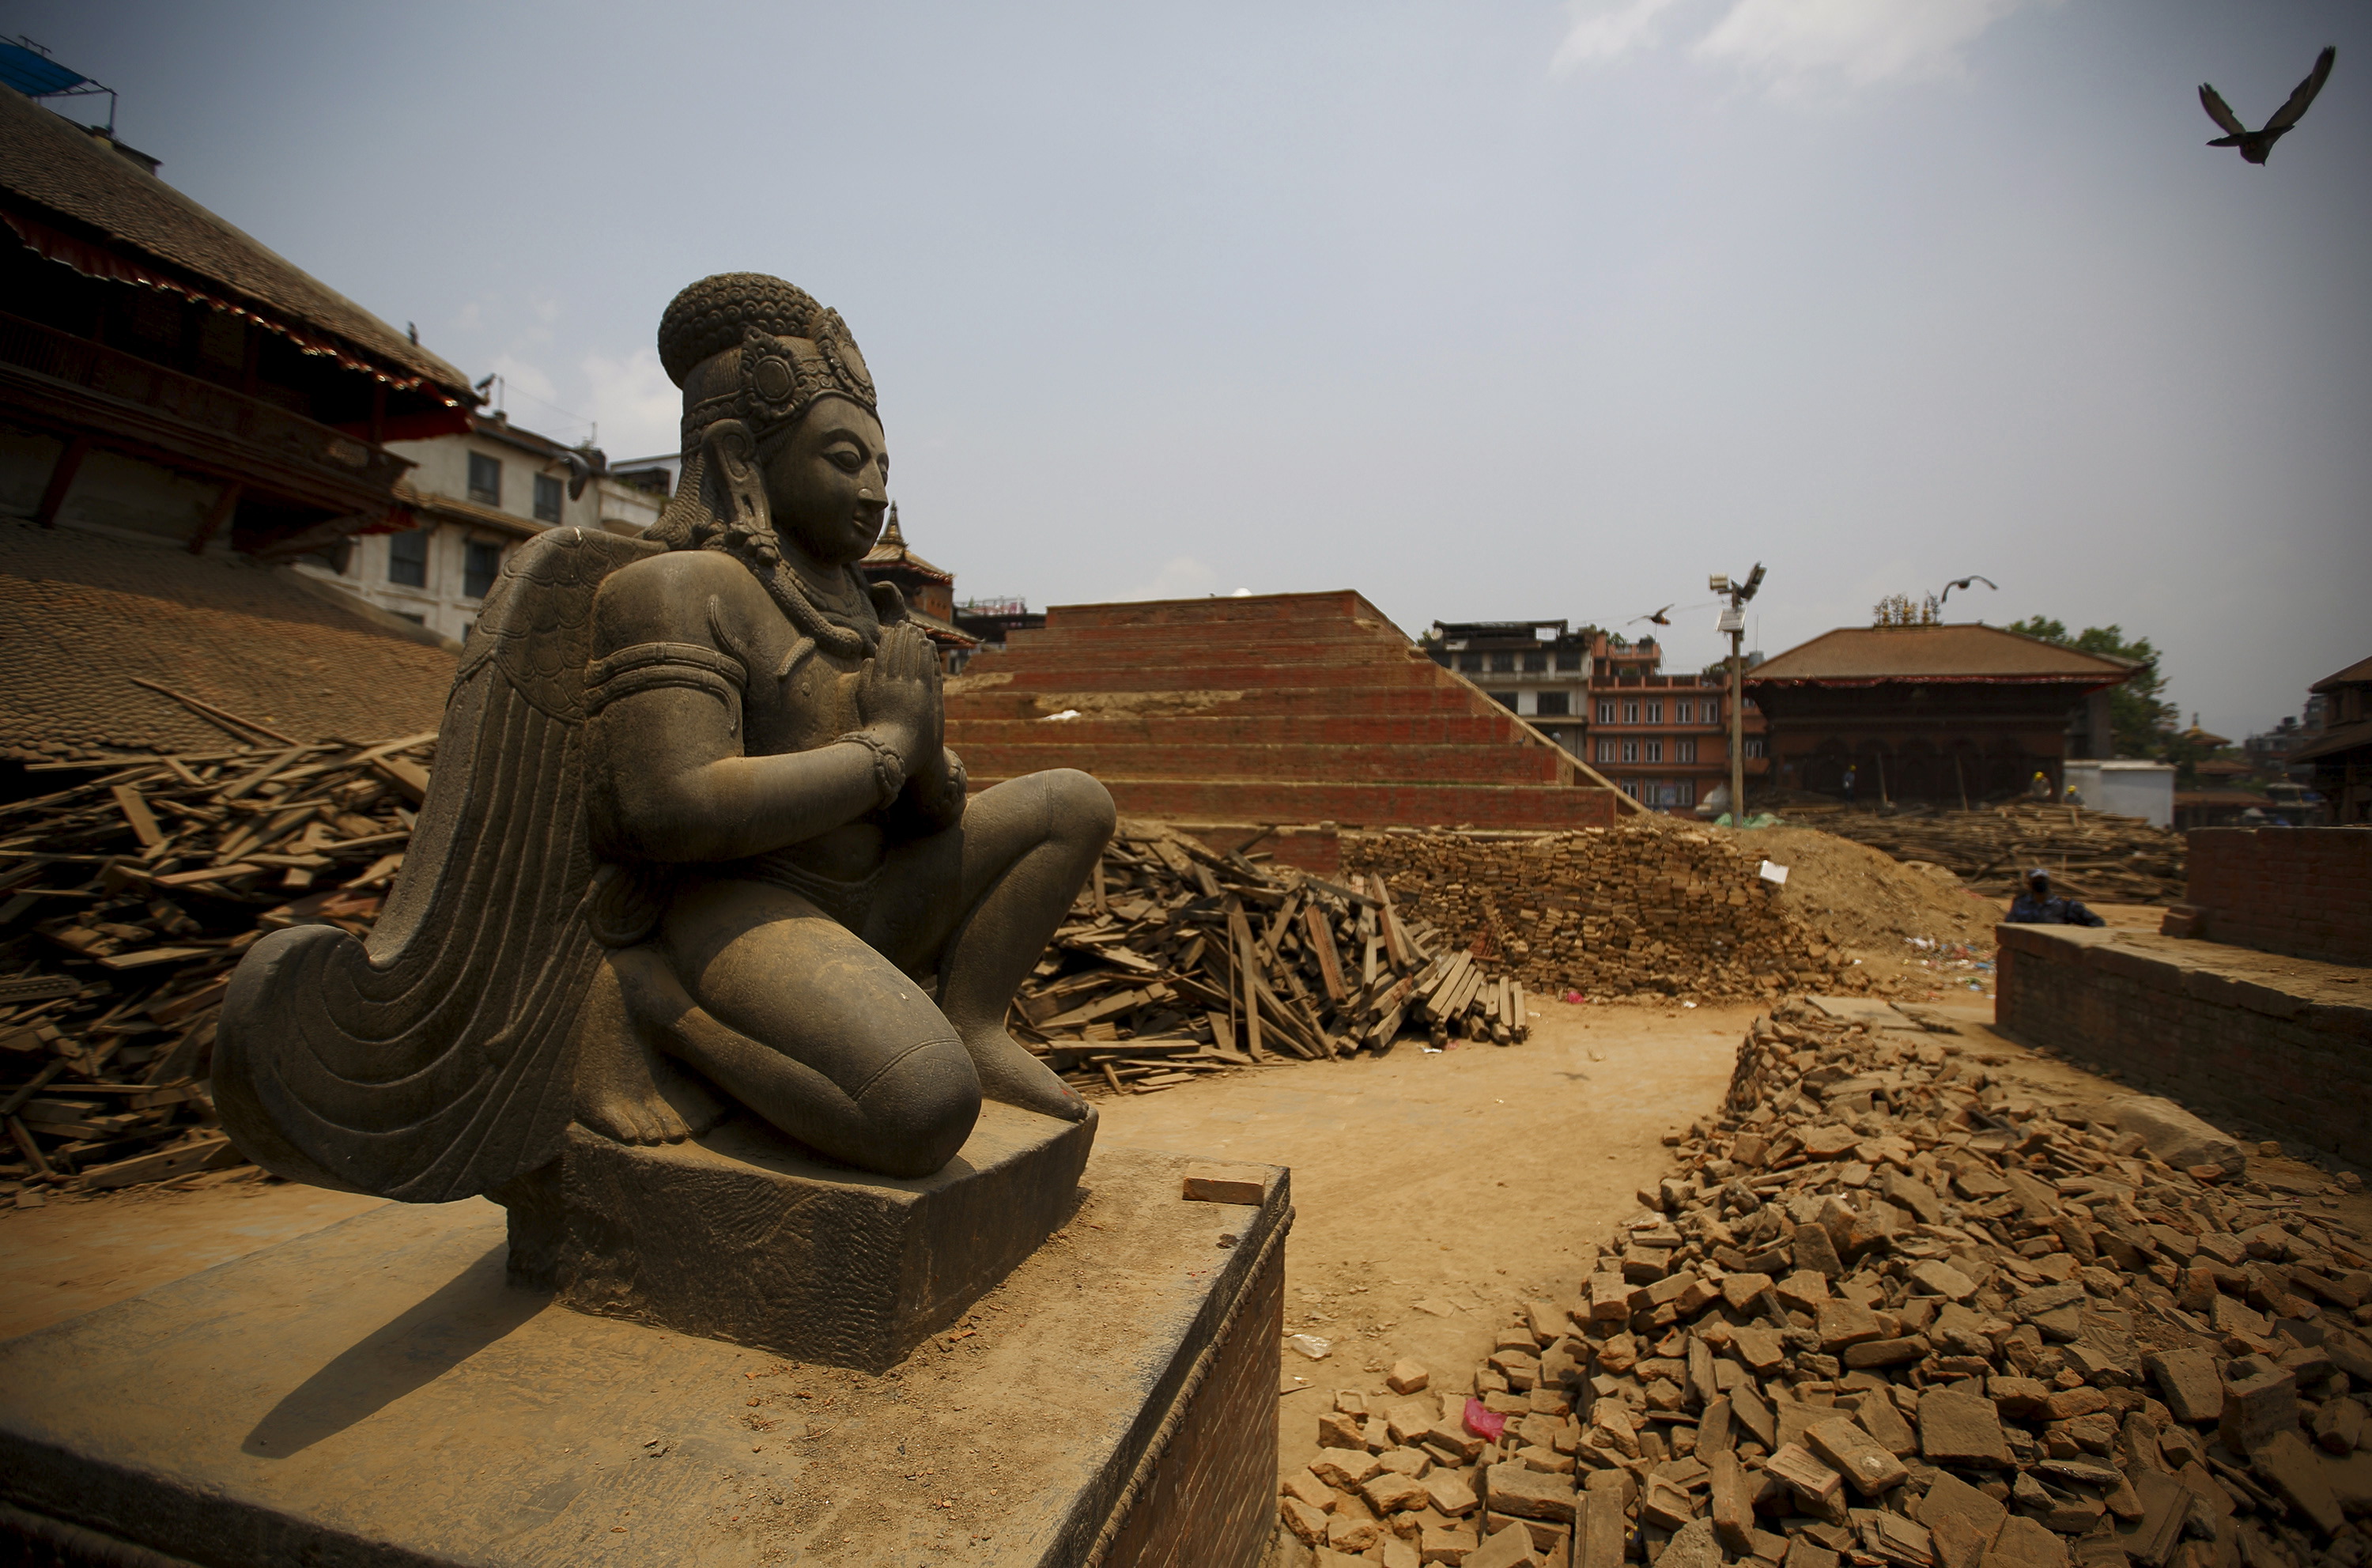 Remains of a collapsed temple are pictured at Bashantapur Durbar Square